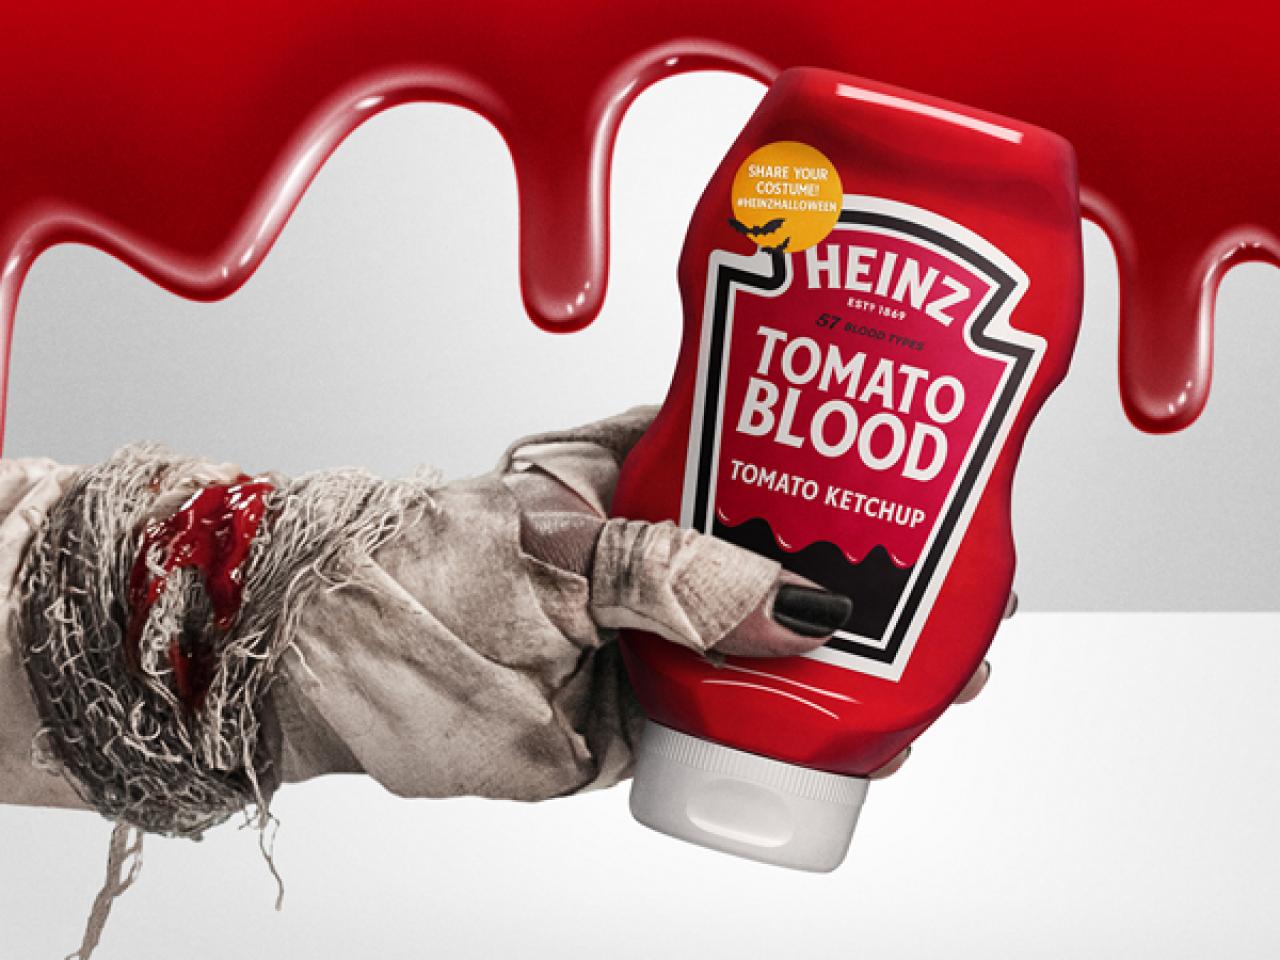 Heinz Ketchup Changes Label So You Can Finally Get It Out of the